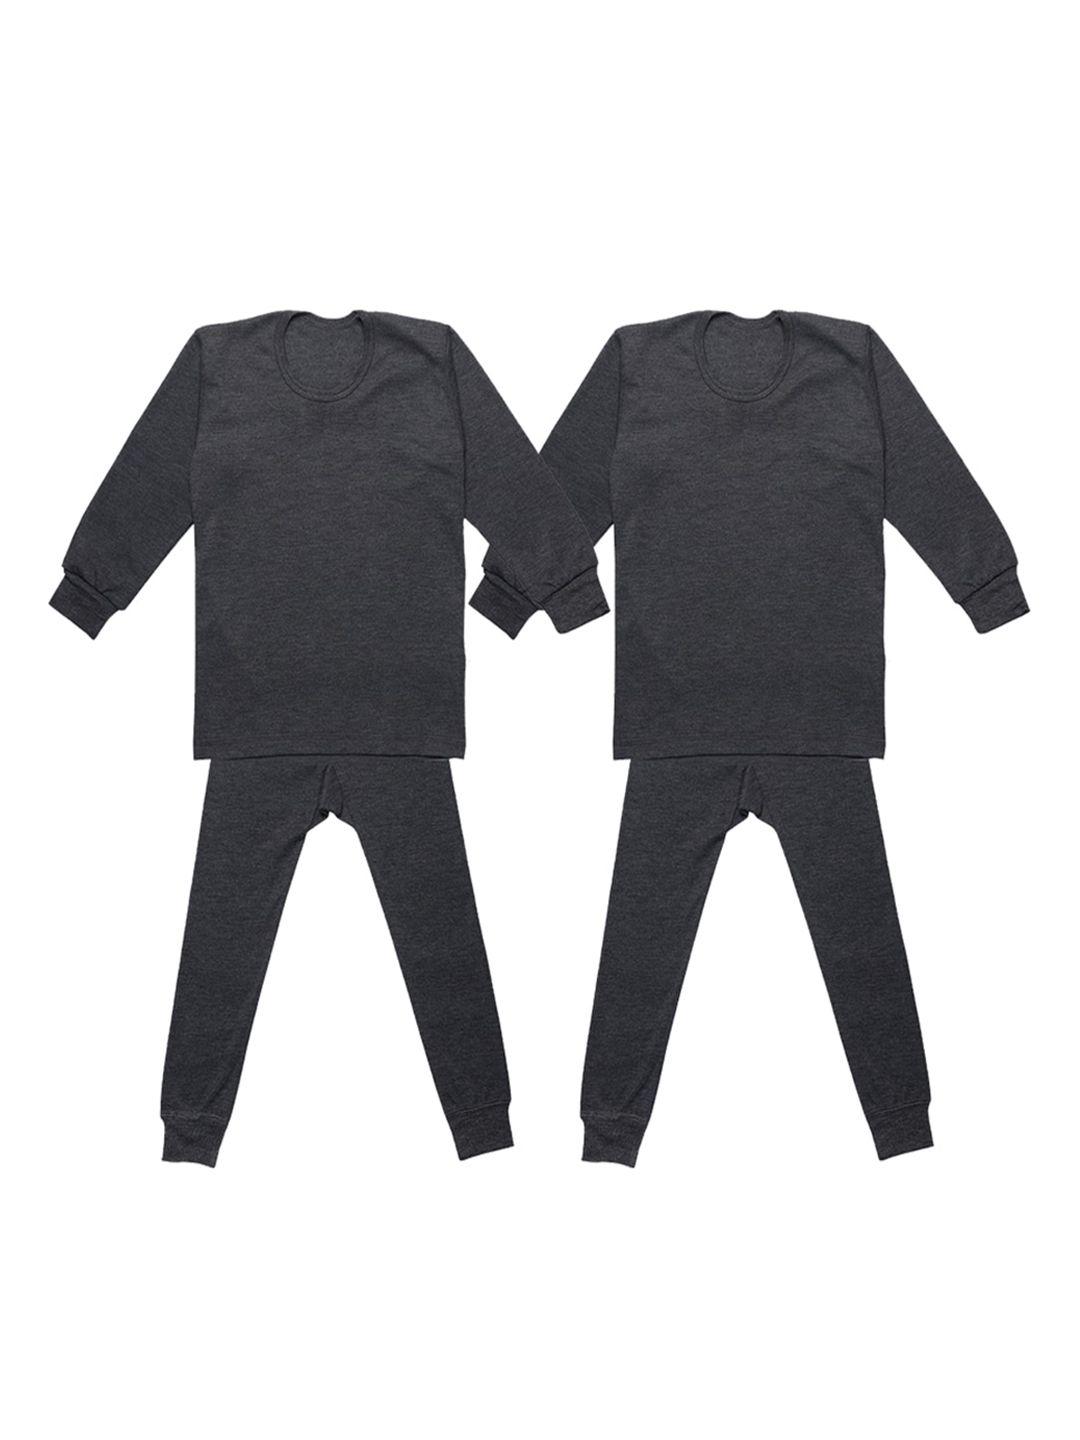 vimal jonney kids pack of 2 grey solid thermal top and bottom set